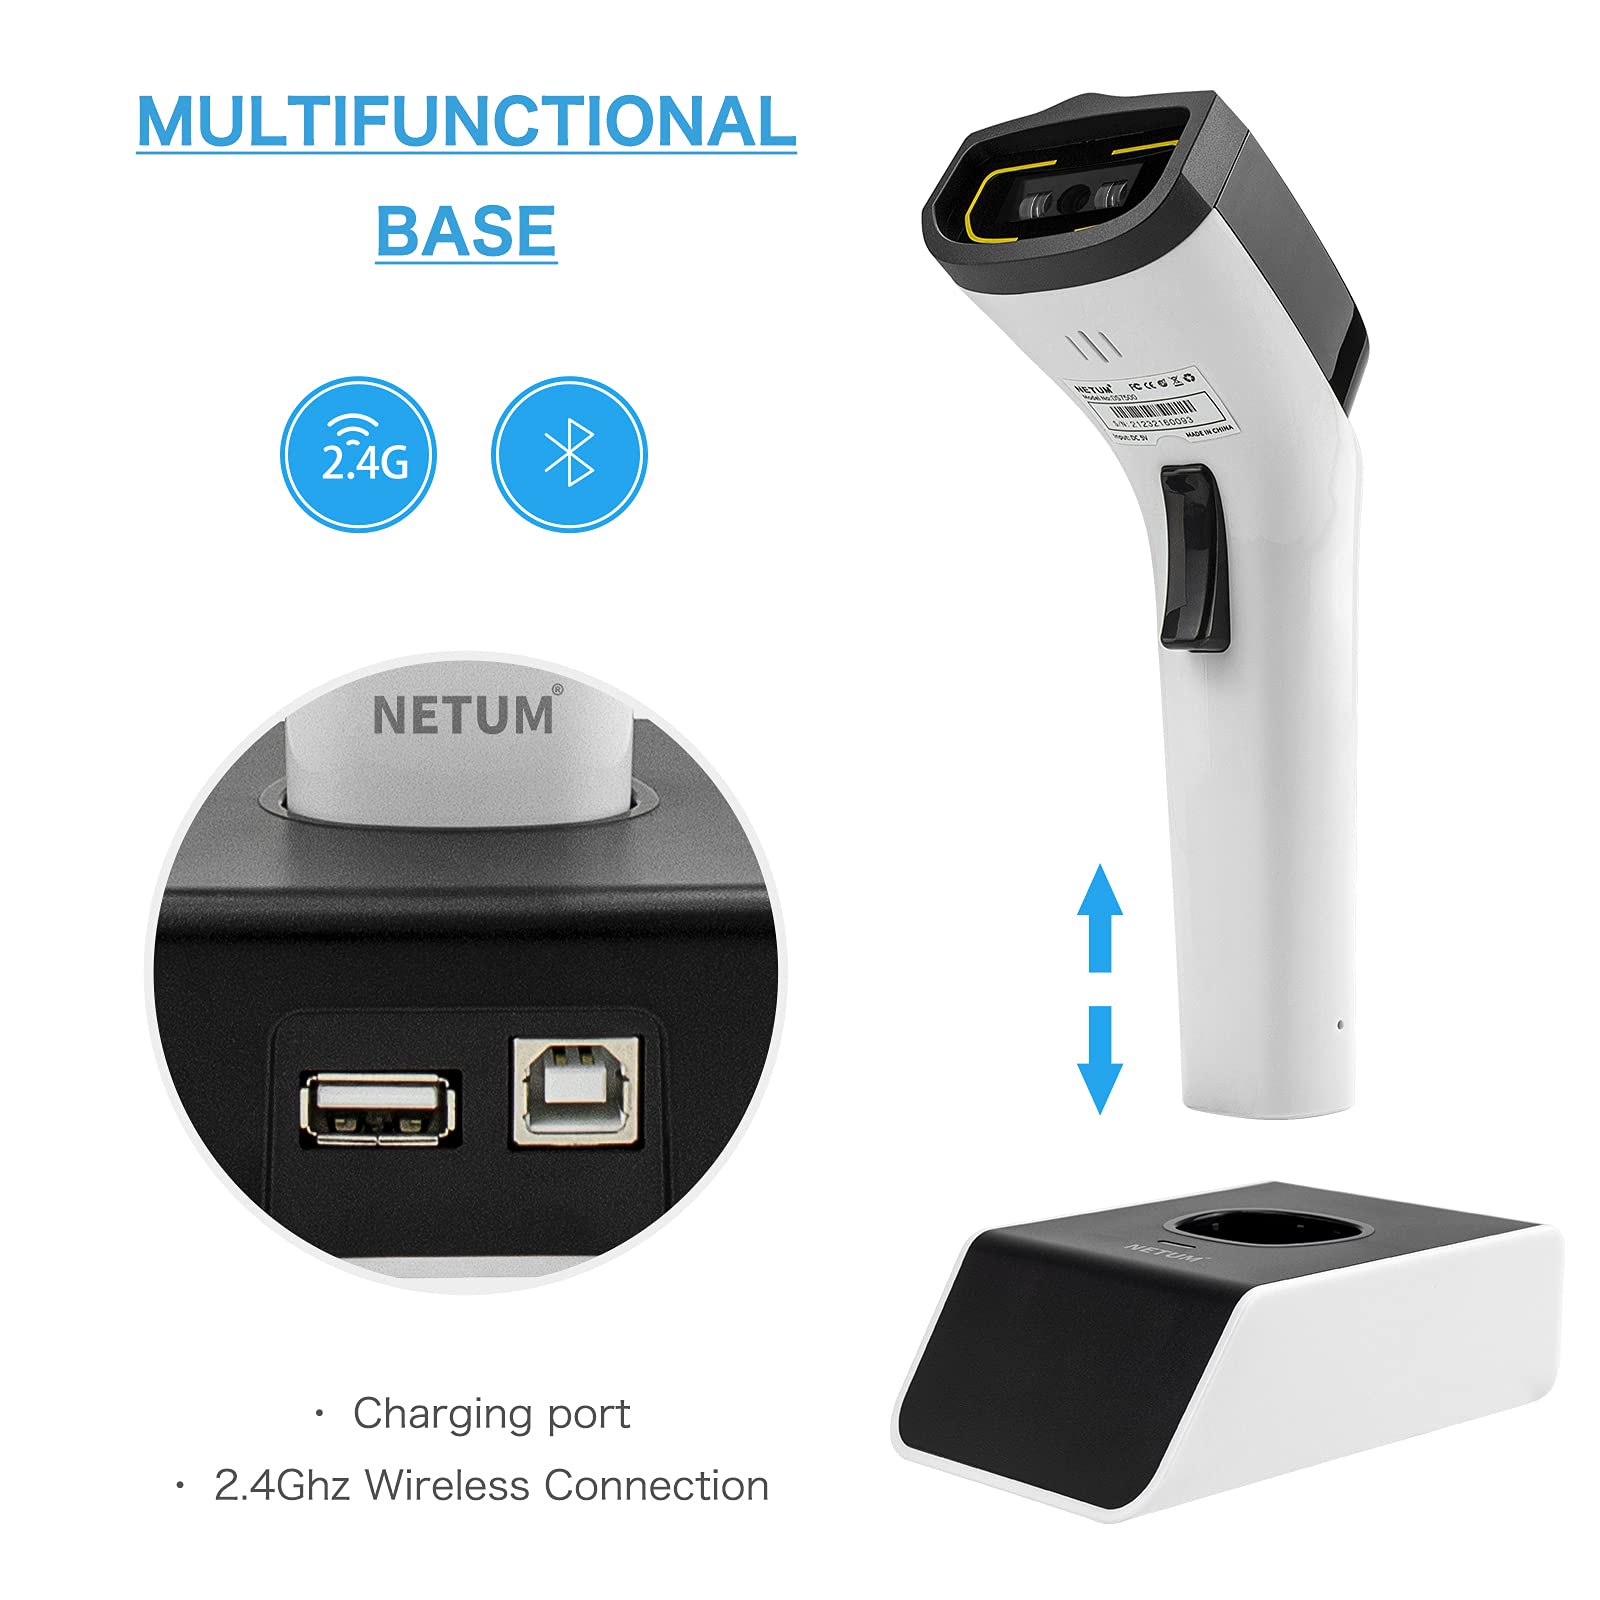 NETUM Hands Free Automatic Sensing Bar Code Reader 1D 2D QR pdf417 Scan Gun Works with MAC OS, Windows, iOS, Android - DS8100